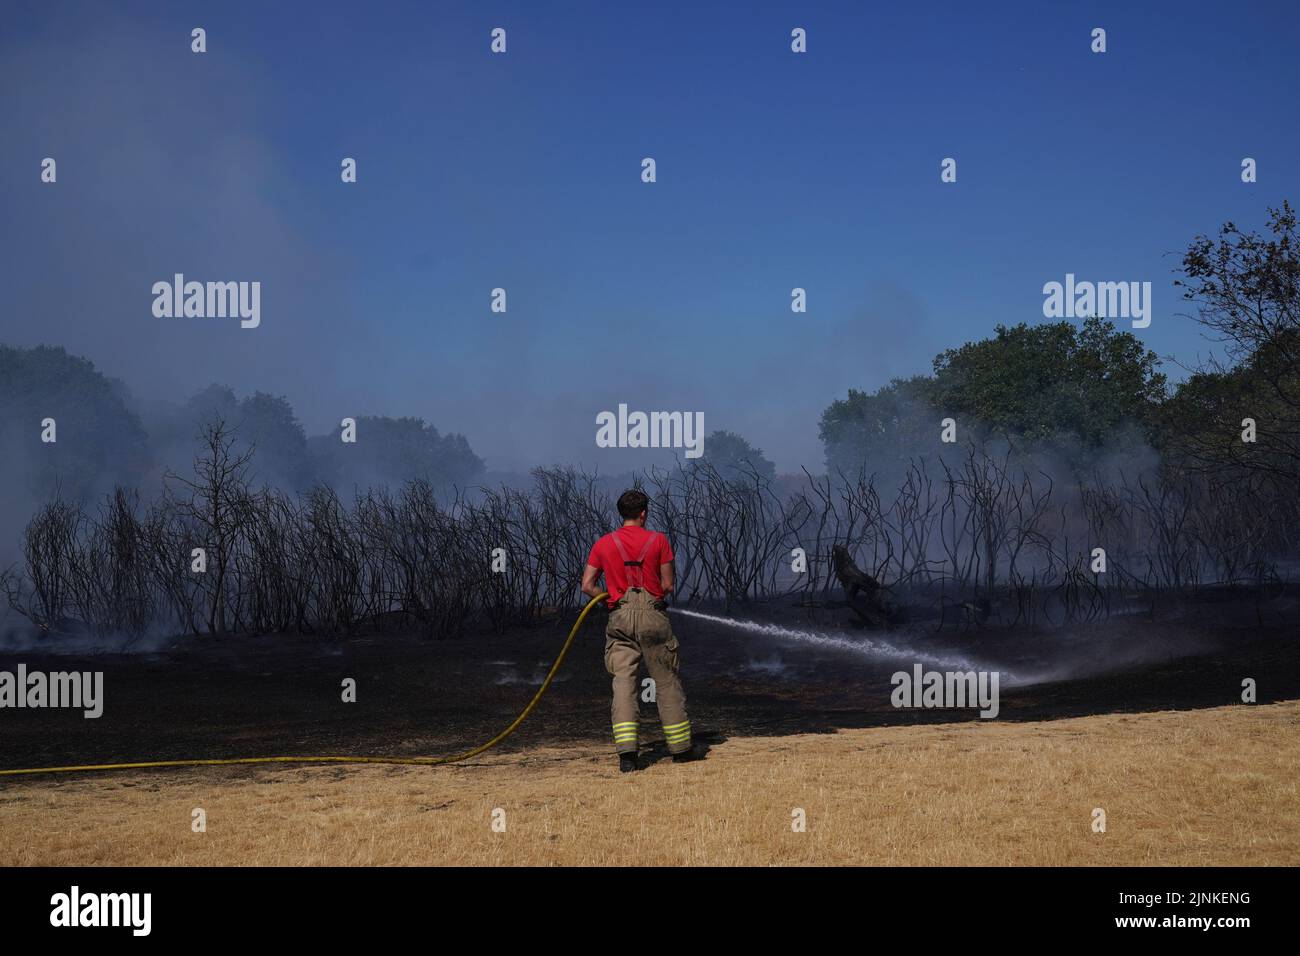 A firefighter dampens down a grass fire on Leyton flats in east London, as a drought has been declared for parts of England following the driest summer for 50 years. Stock Photo